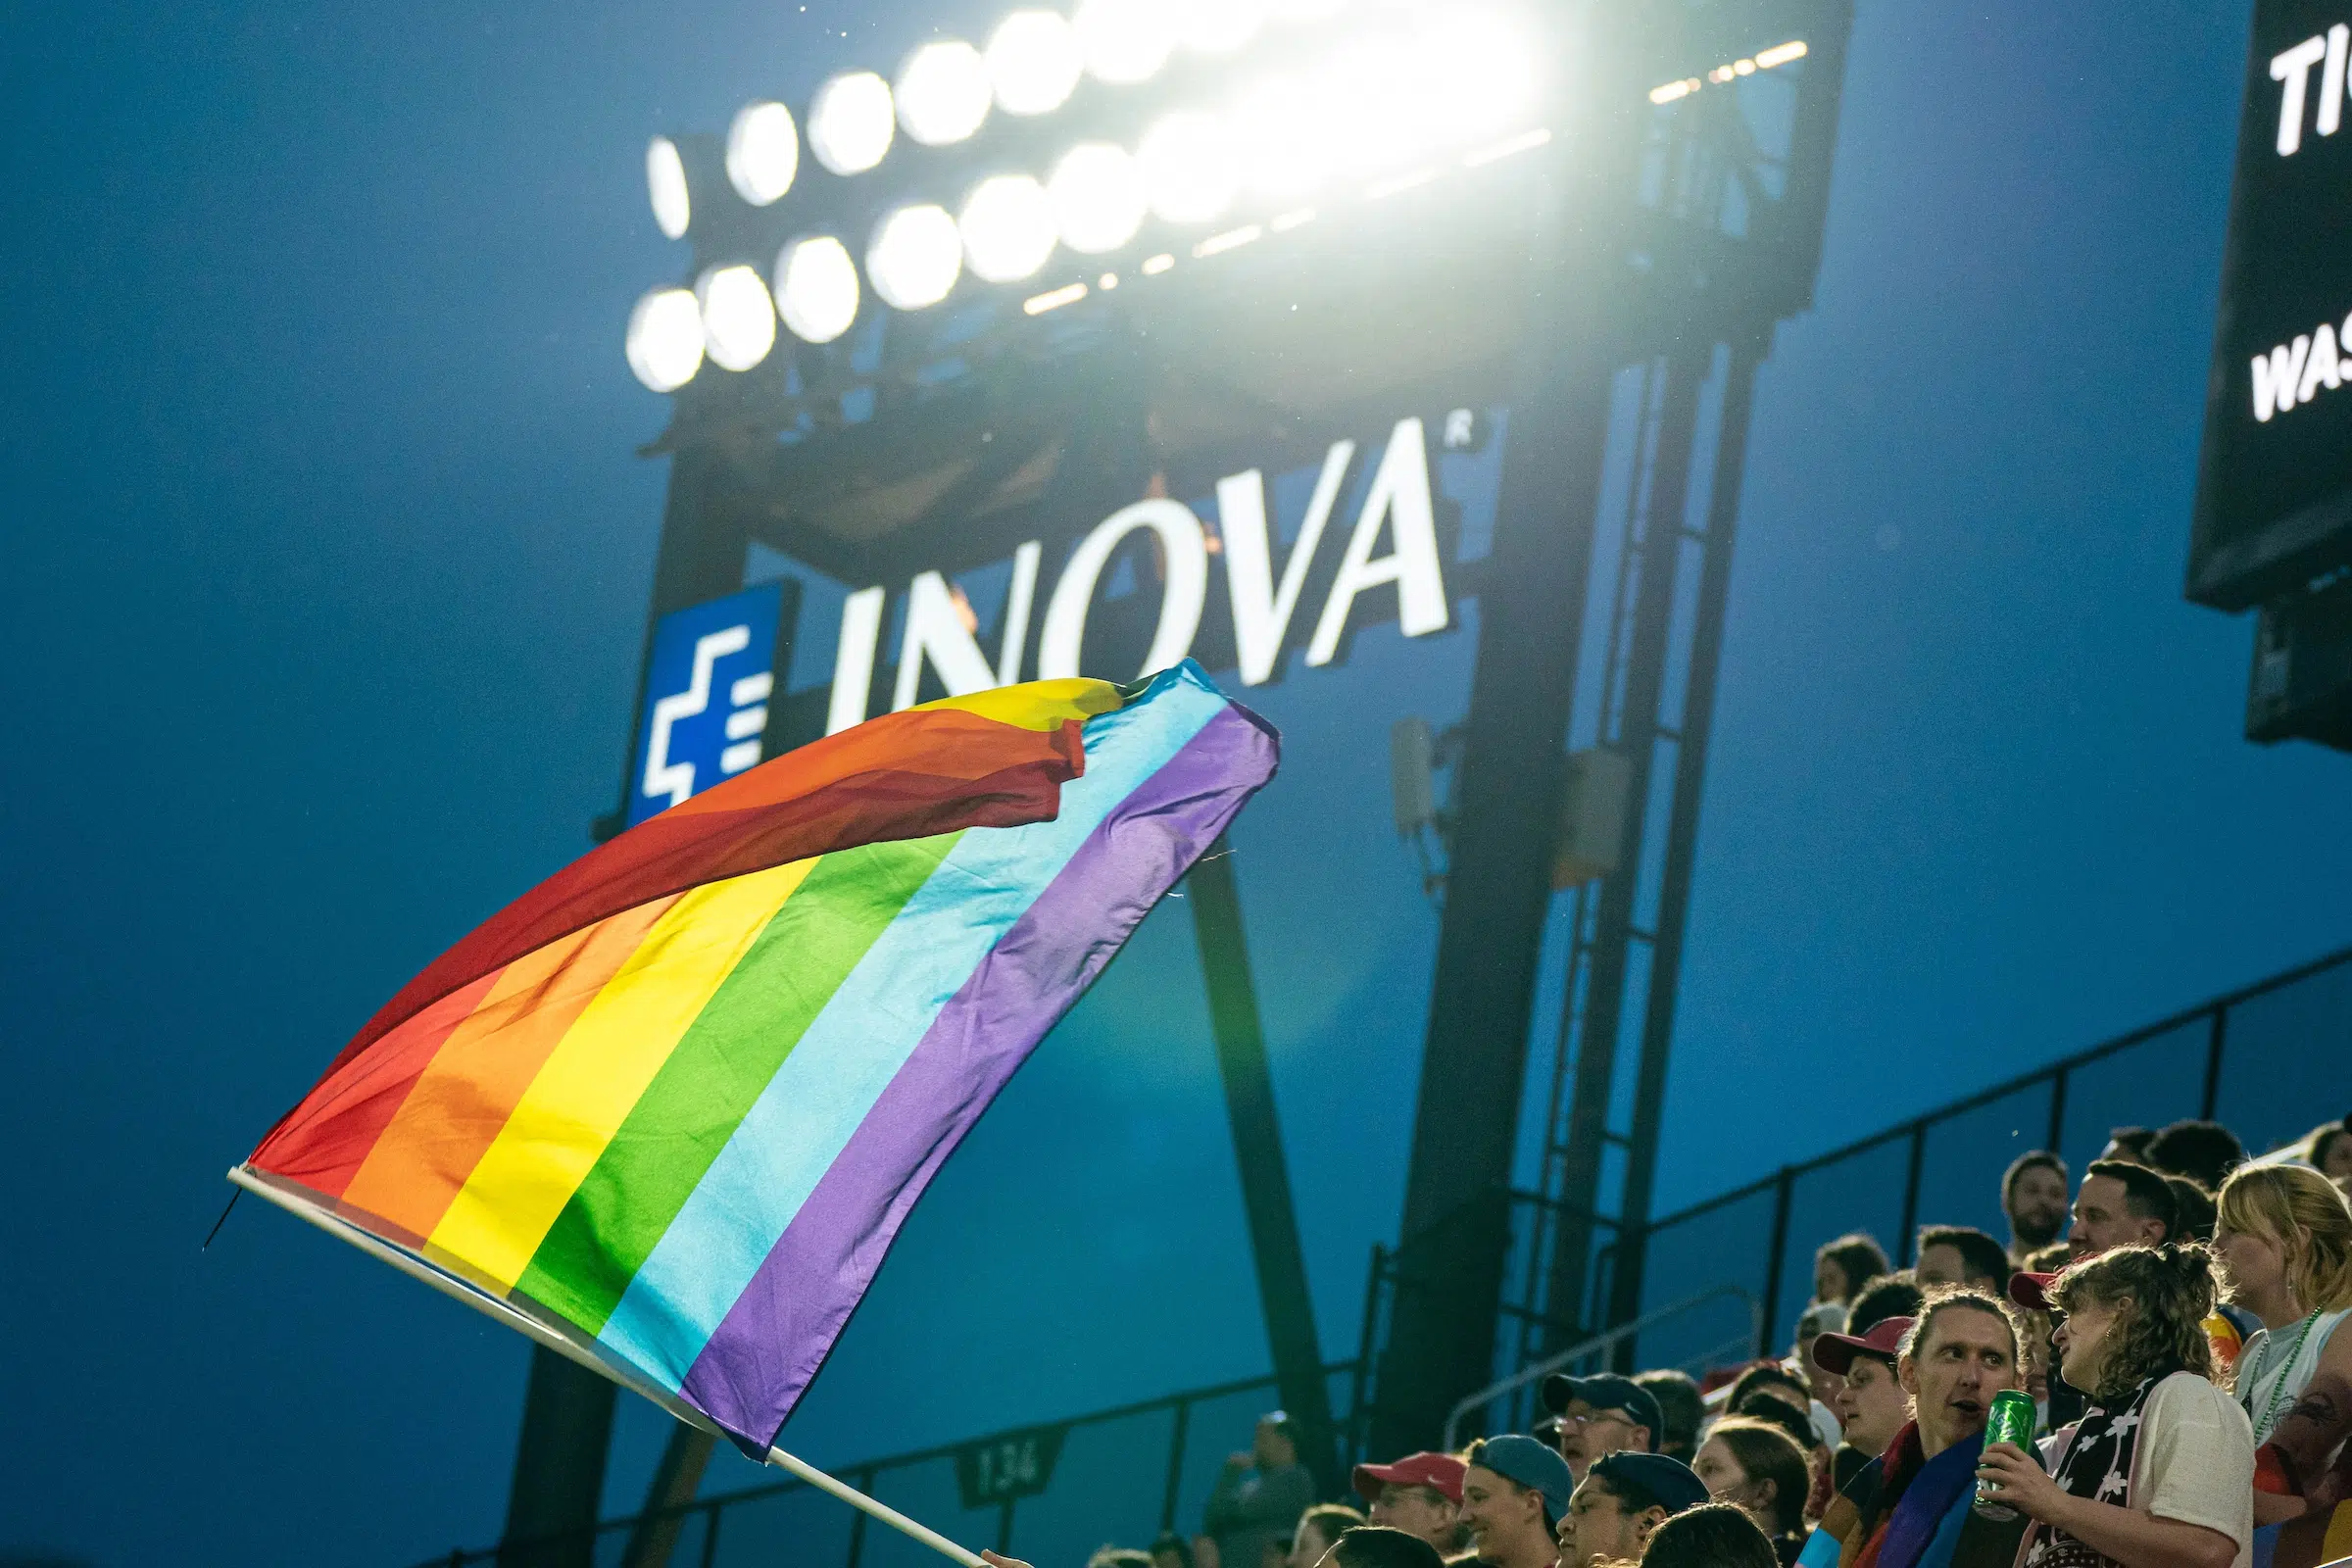 An LGBTQ+ rainbow flag is waved above a crowd of fans.